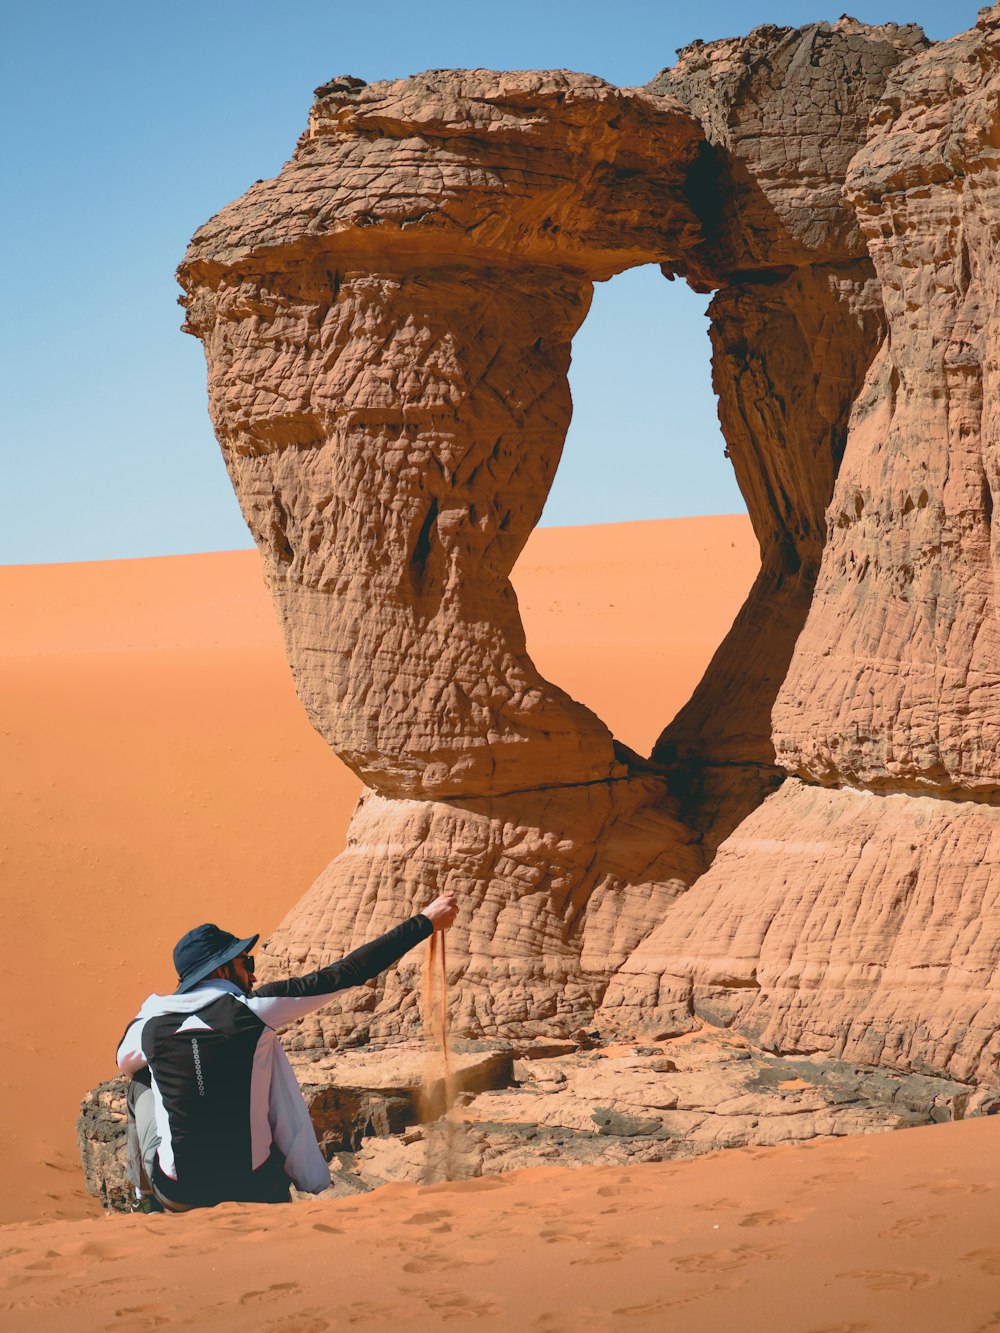 a person sitting on a rock formation in the desert